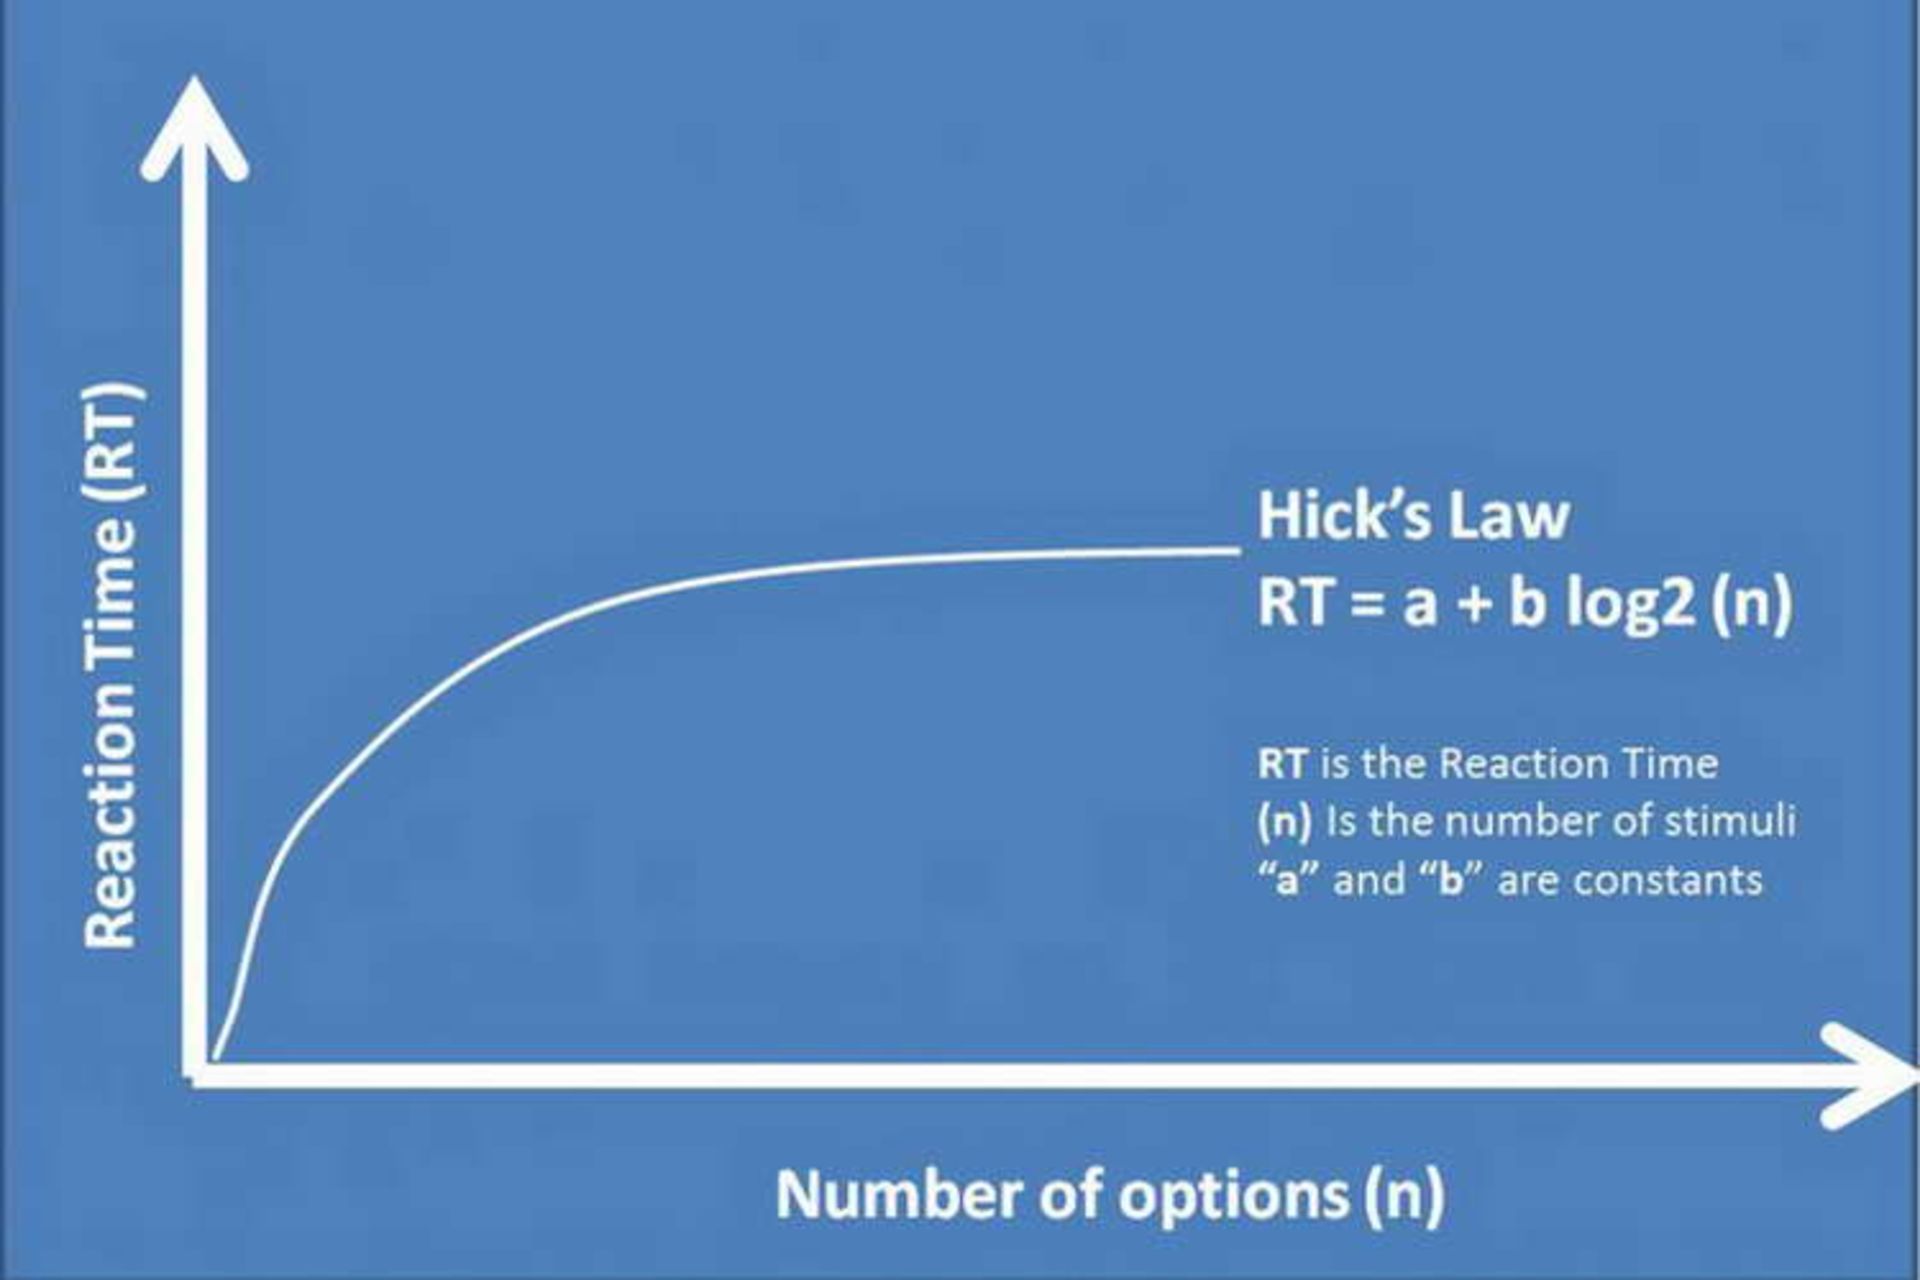 Hick’s Law